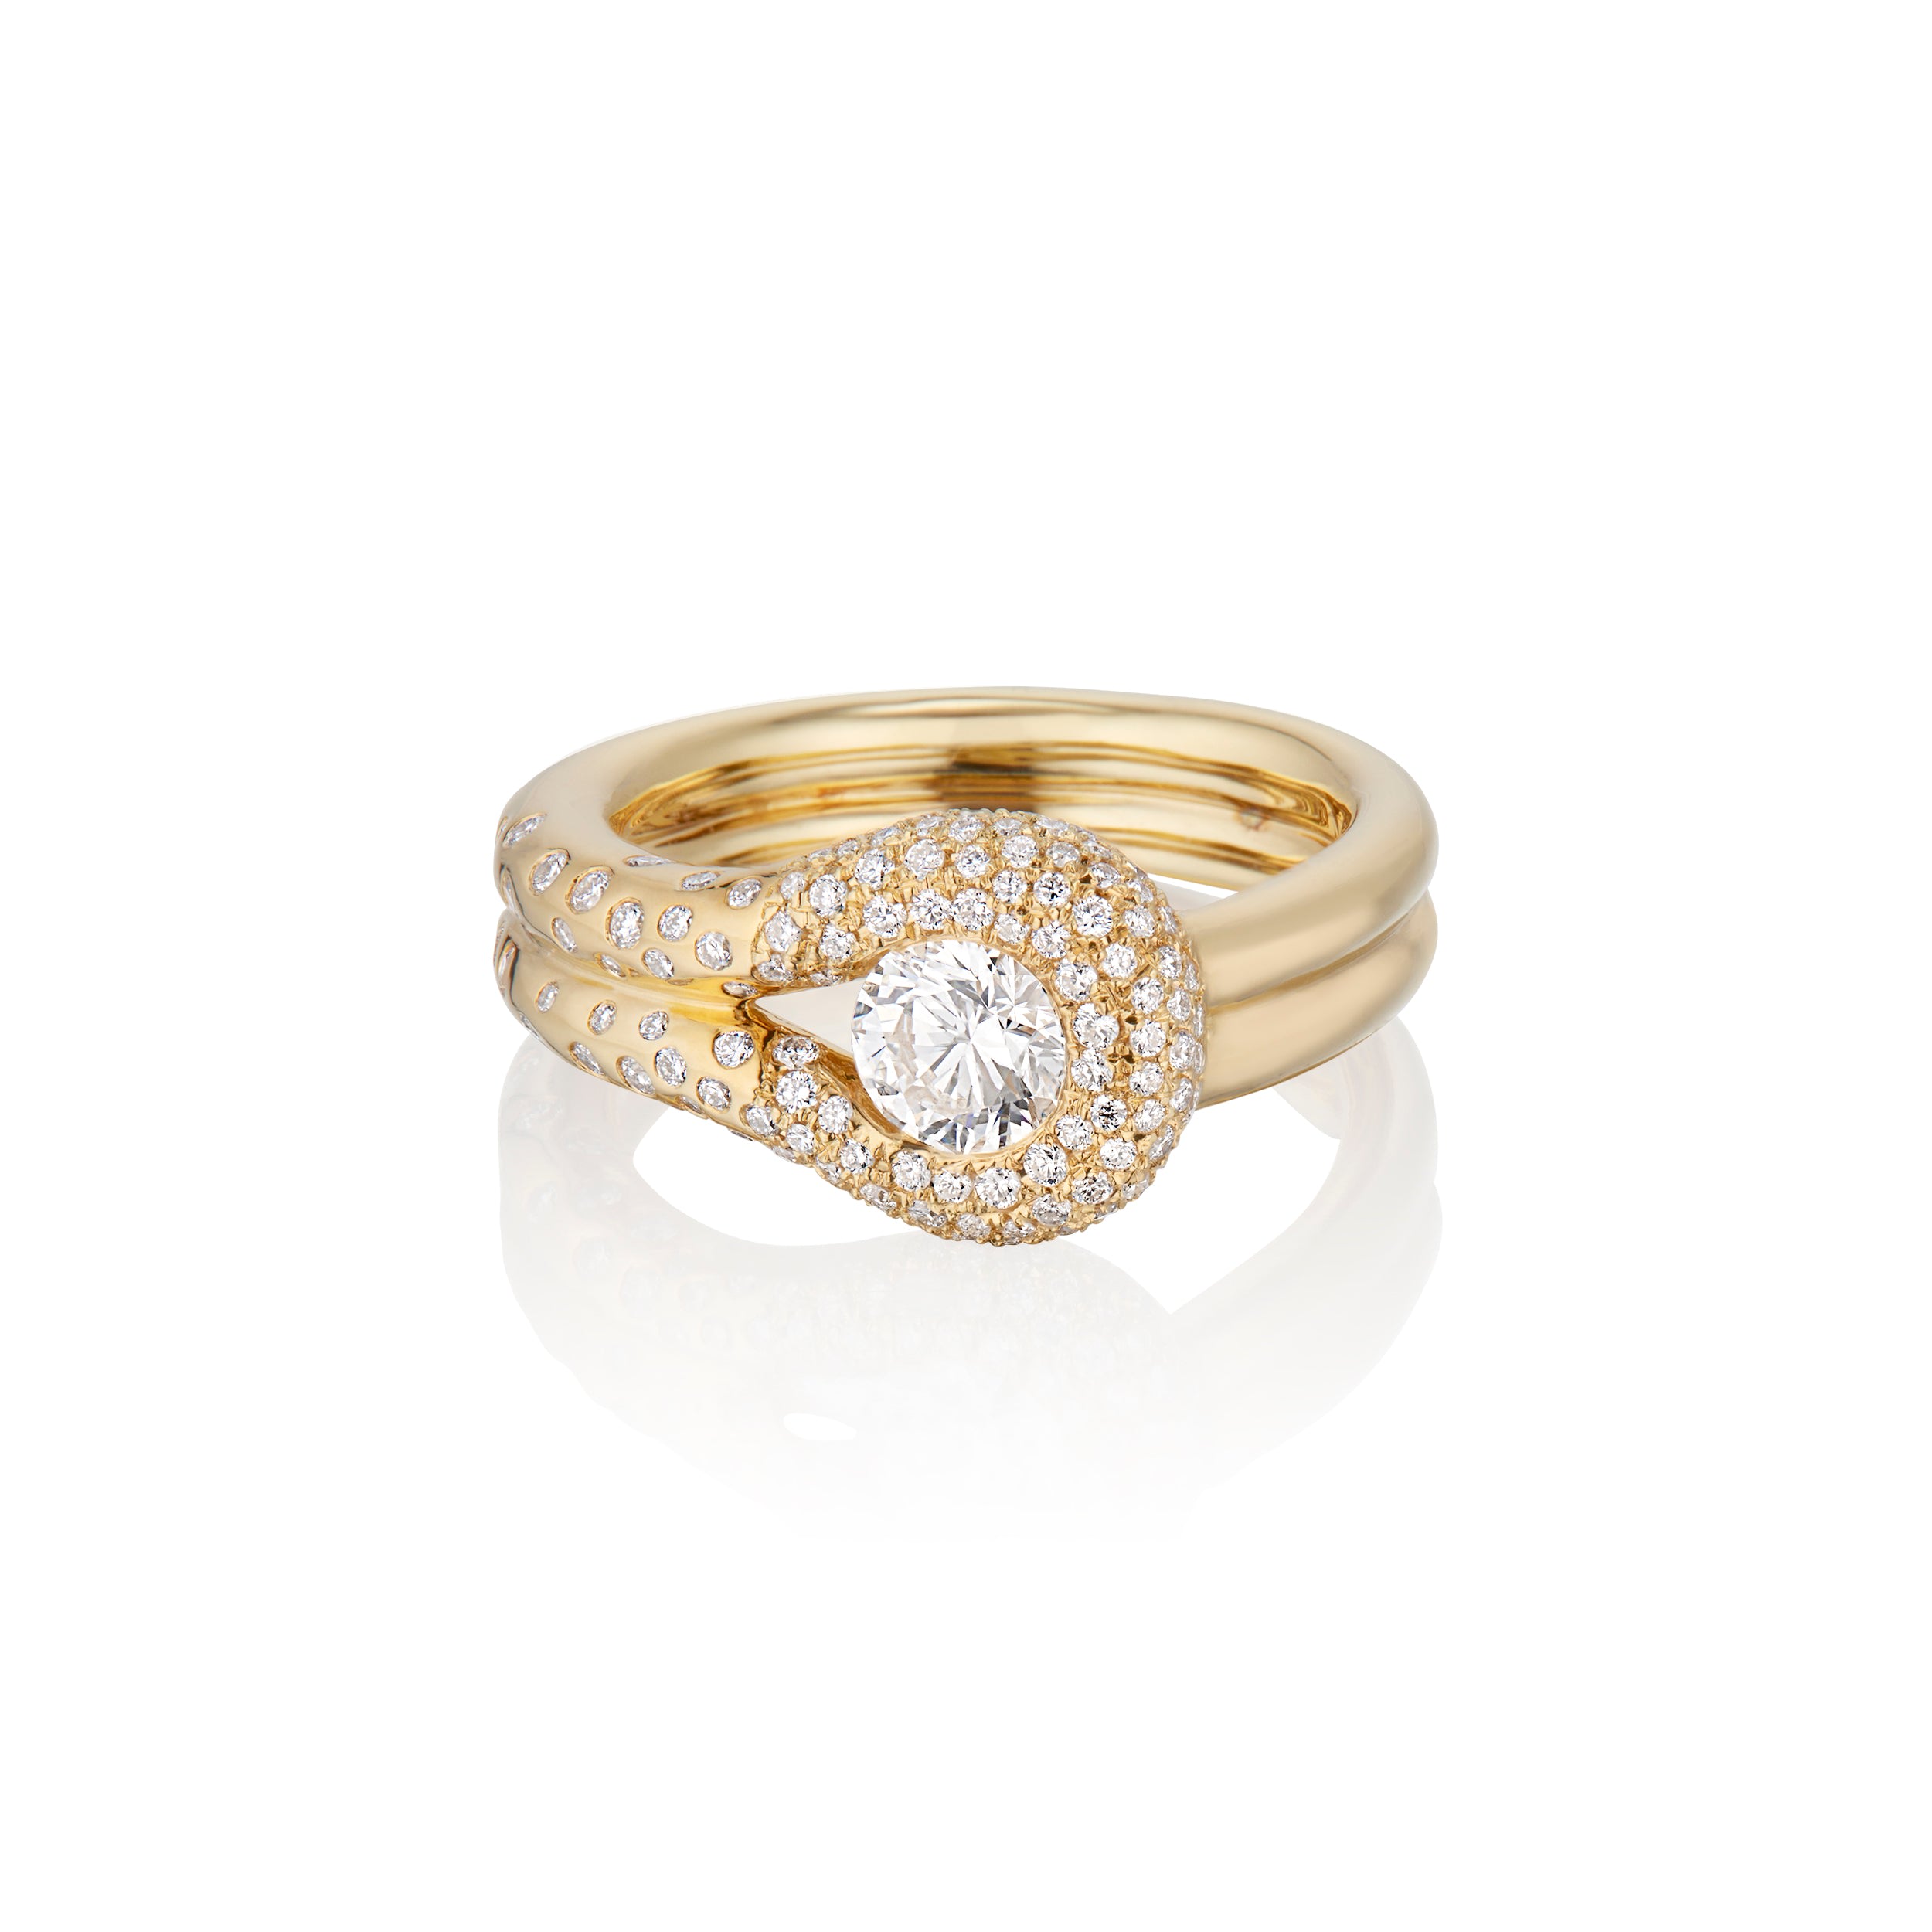 Women’s Neutrals / Gold / White Comet Pave Statement Ring In 18K Yellow Gold & Diamond Hannah Allene